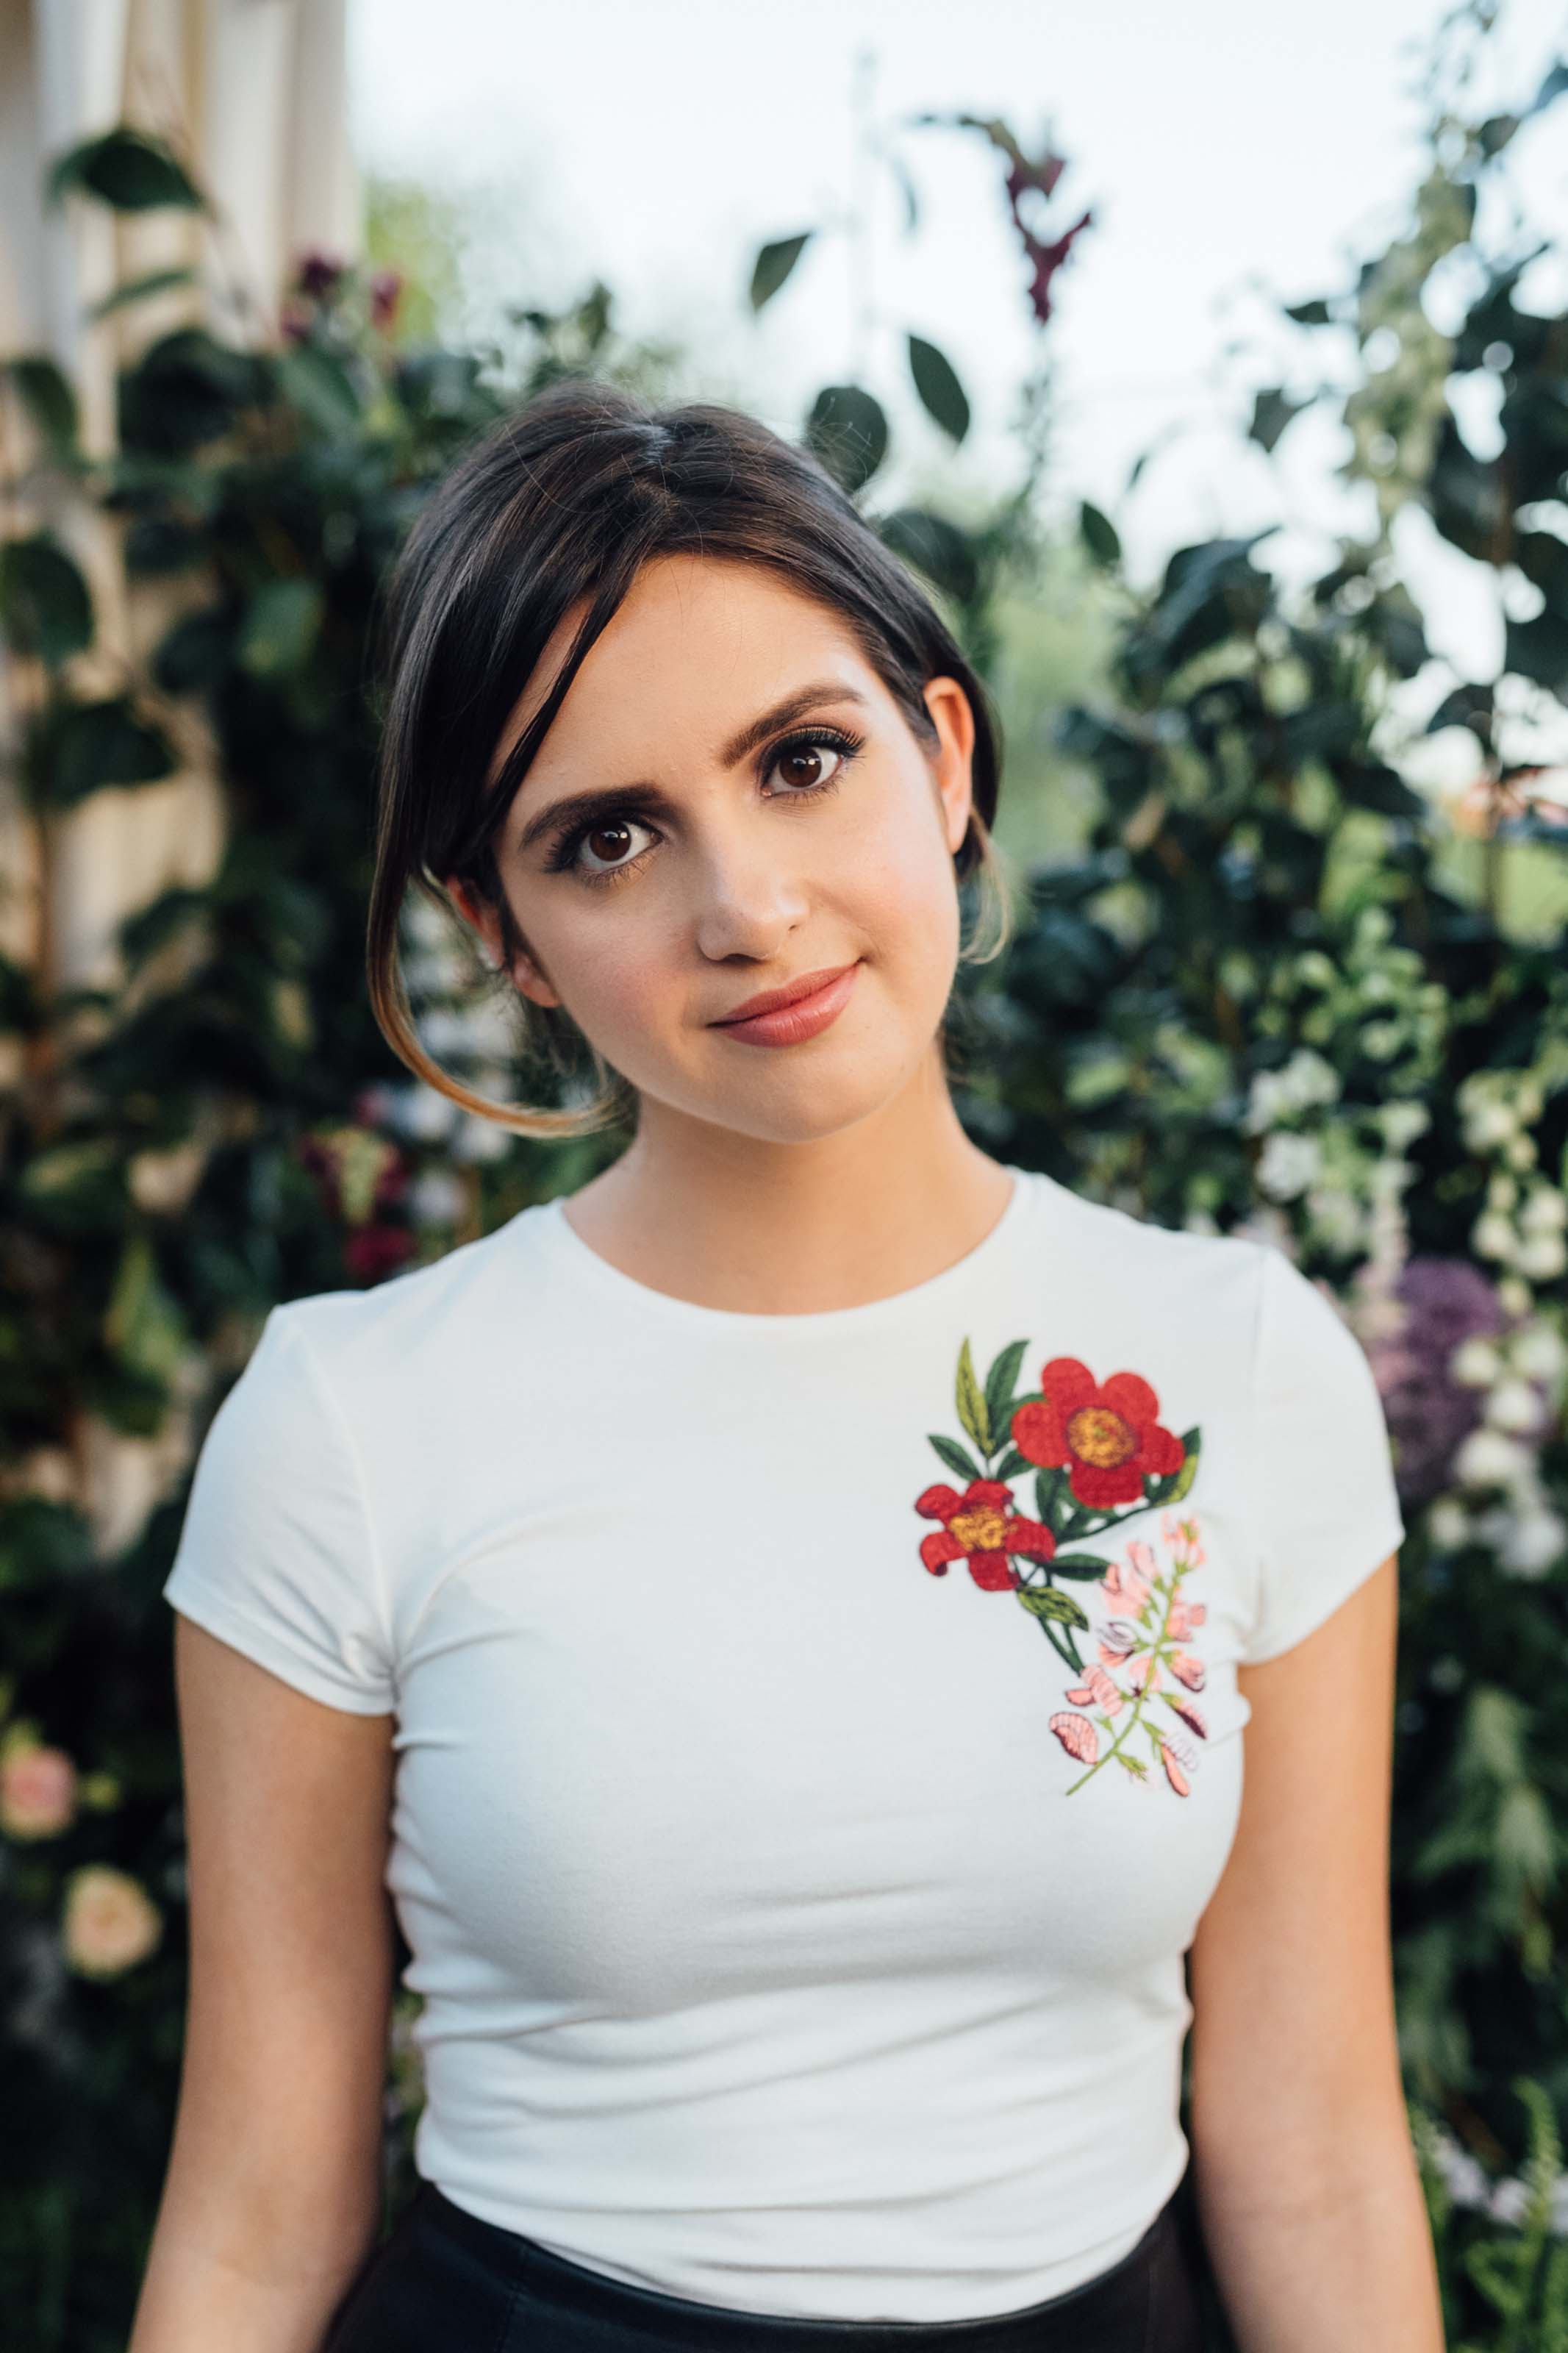 Laura Marano attends Ted Baker London Autum Winter 2018 launch event